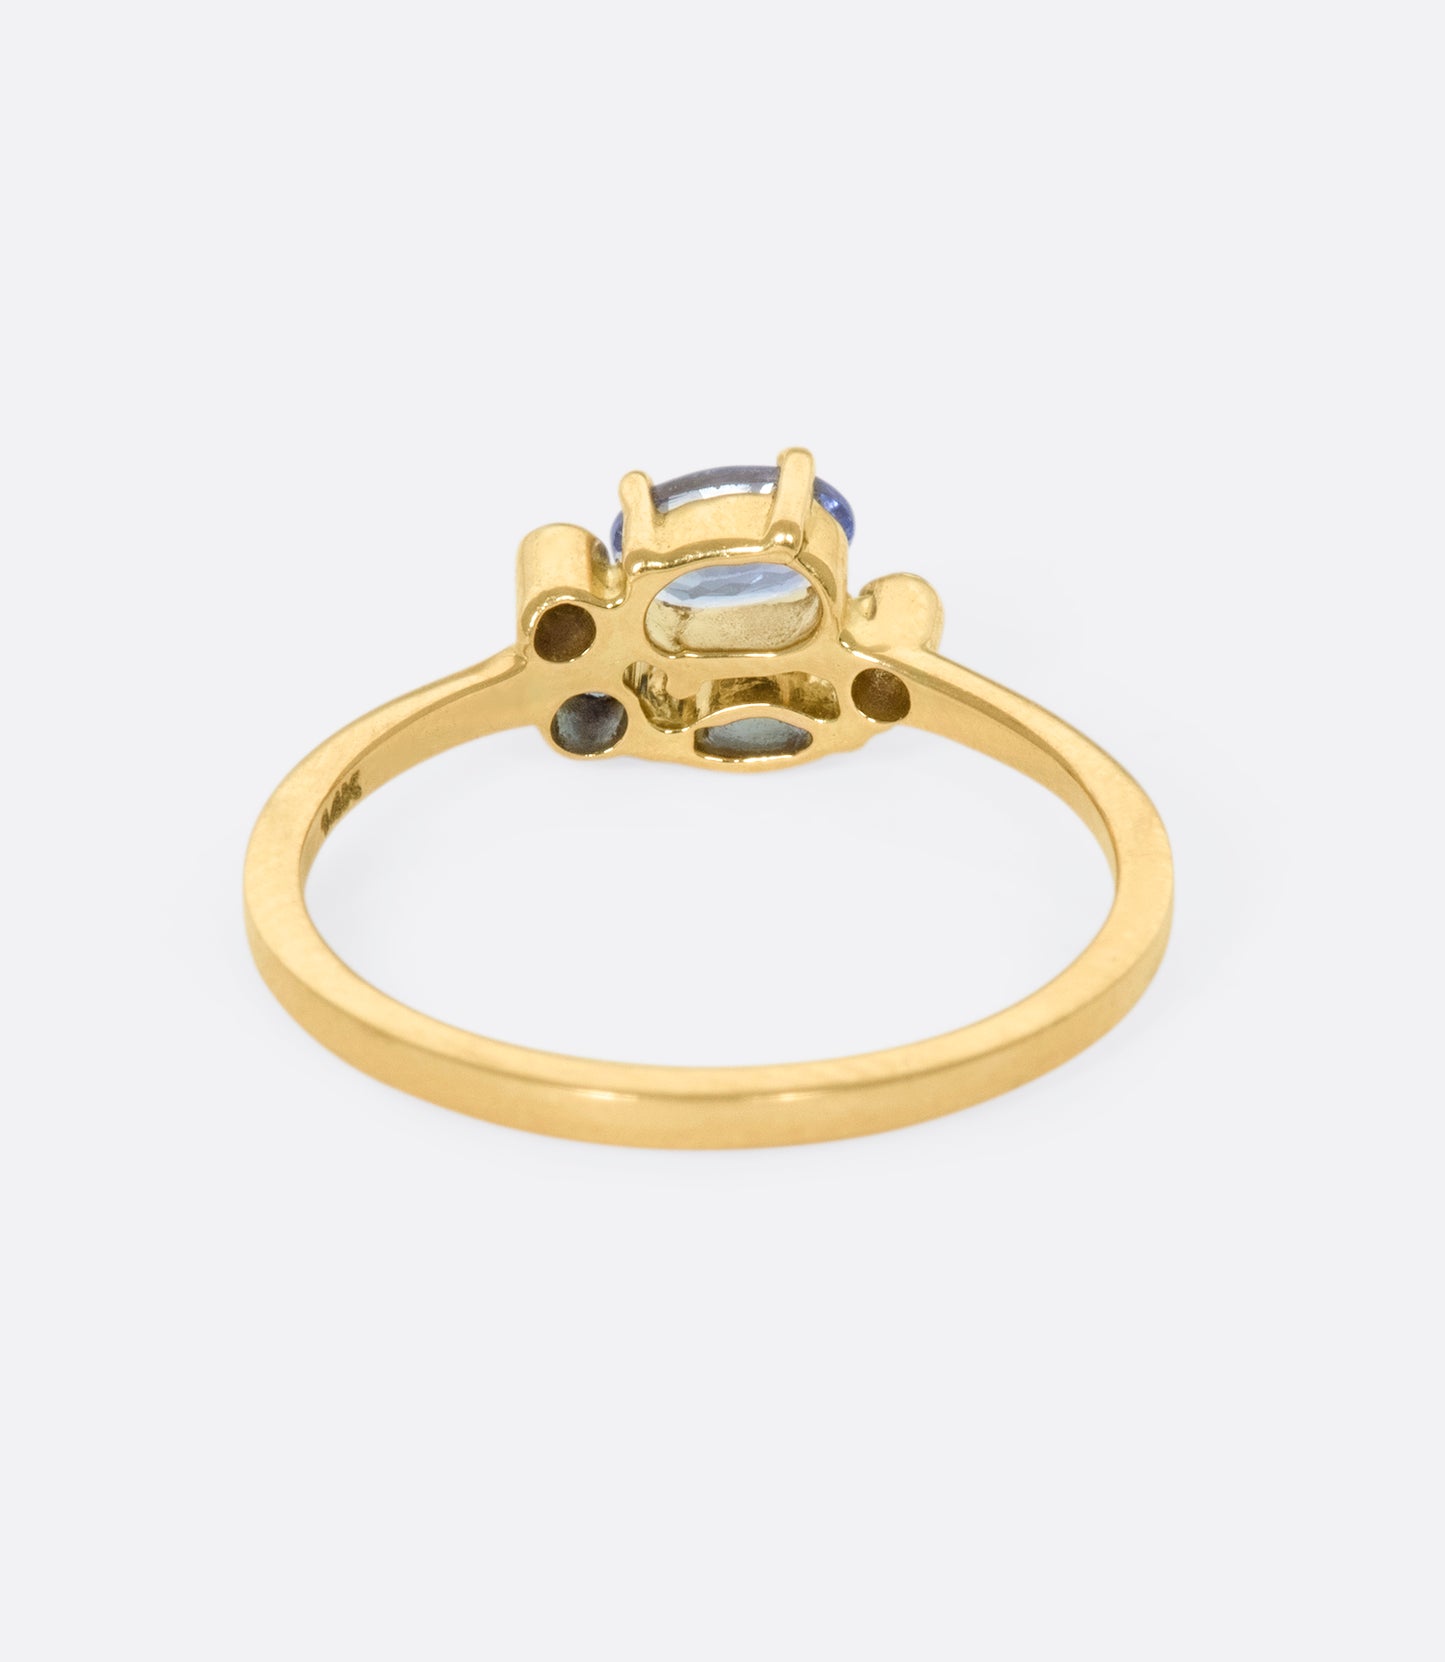 A graceful forget-me-not ring with sapphires, kyanites, and round diamonds on a delicate gold band